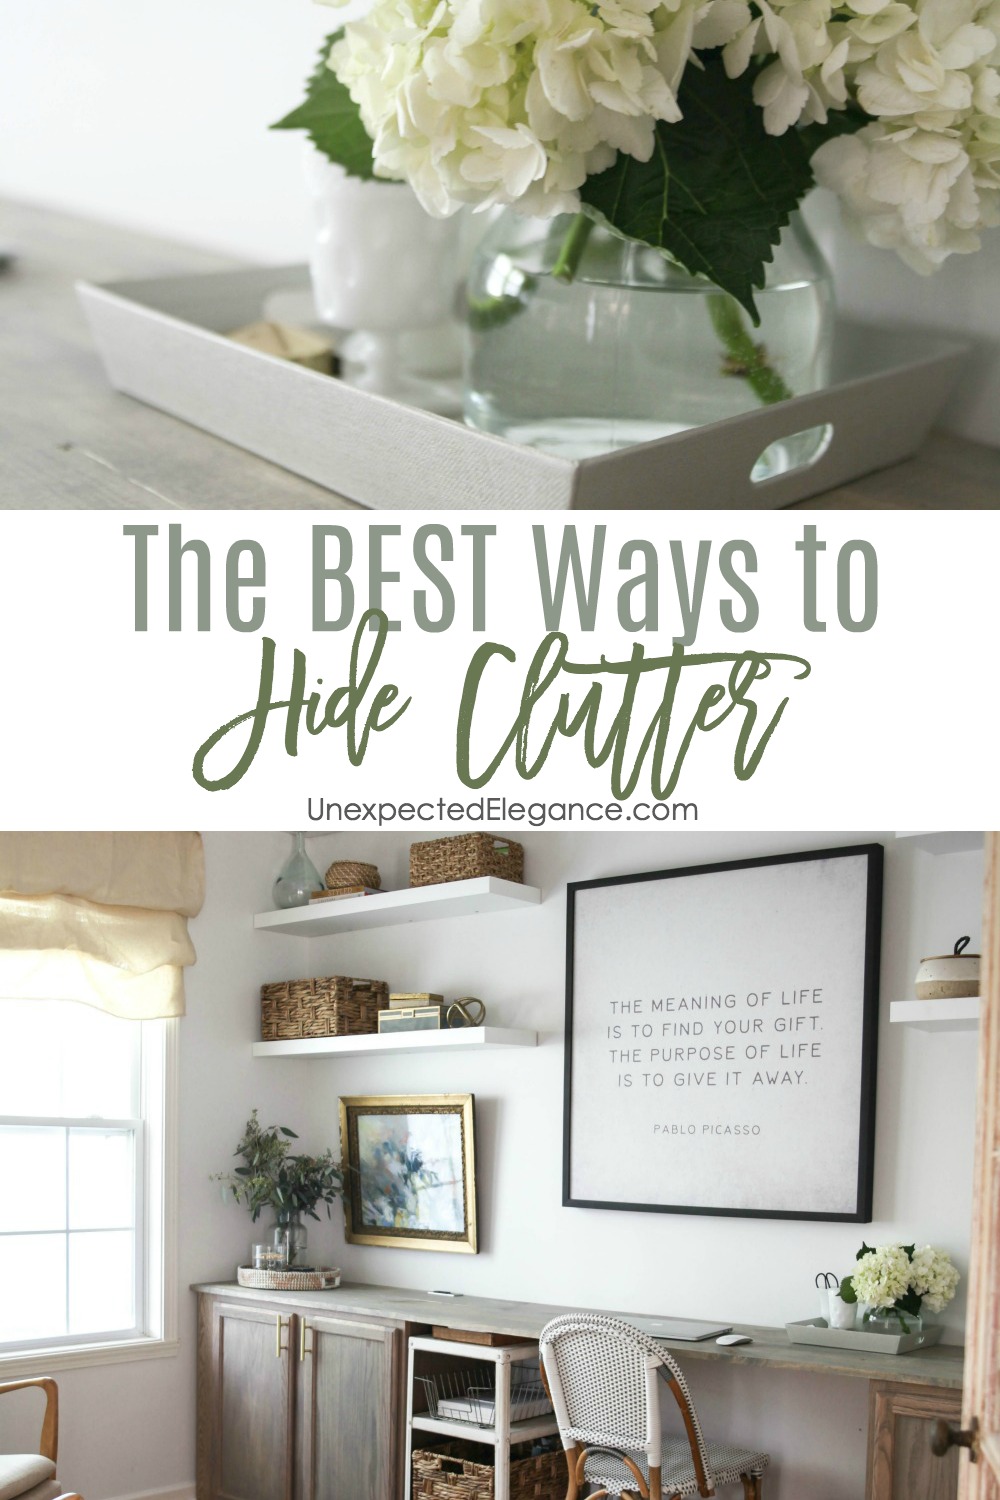 Does it seem like your home is overrun by clutter? Here are some of the best ways to hide clutter in your home and keep it that way!